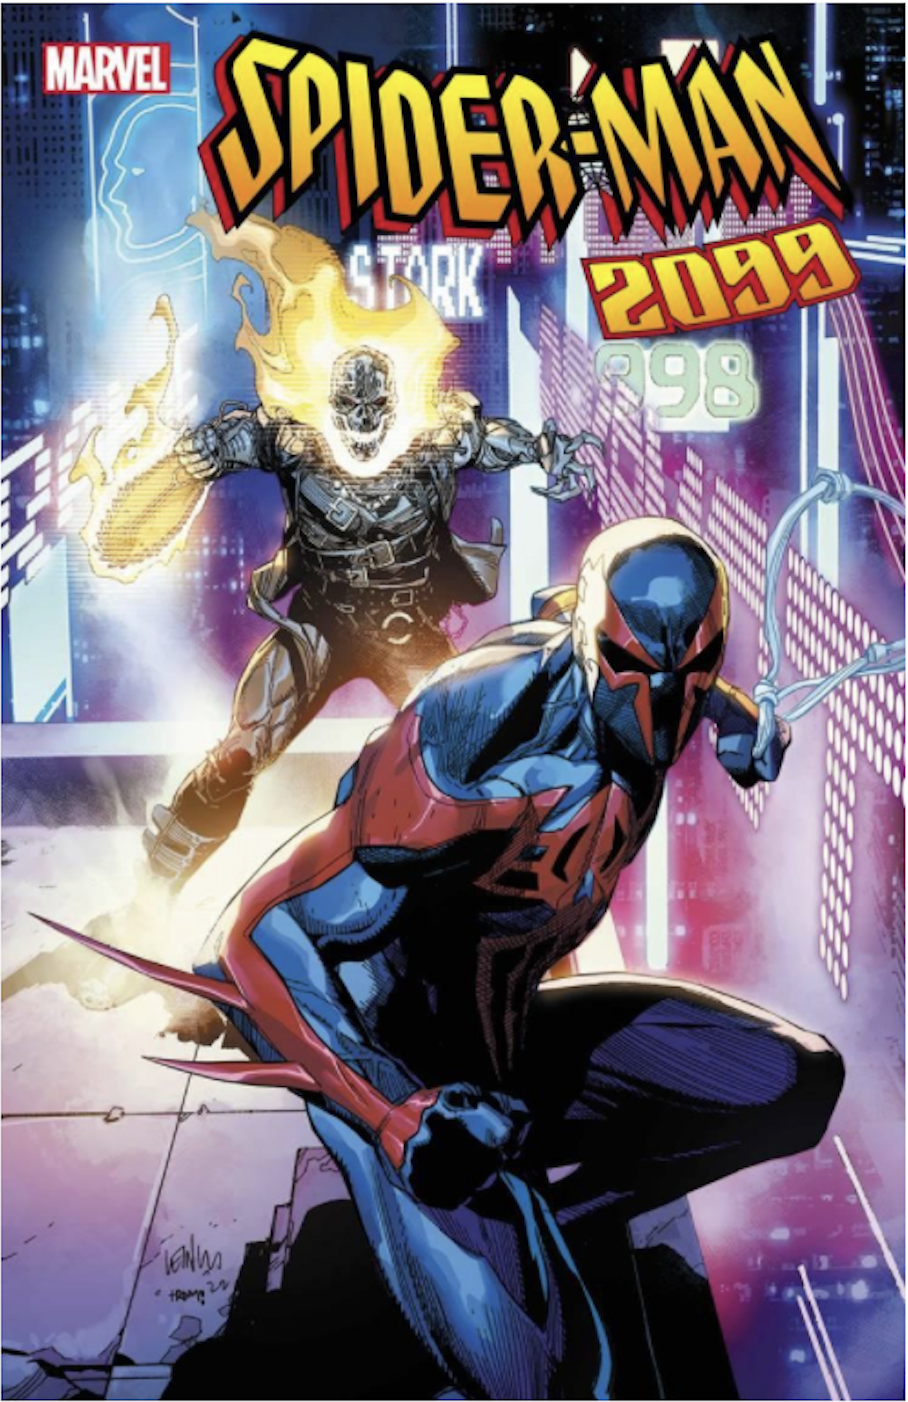 SPIDER-MAN 2099 LEADS A REVOLUTION IN NEW SERIES CELEBRATING MARVEL 2099'S 30TH ANNIVERSARY!